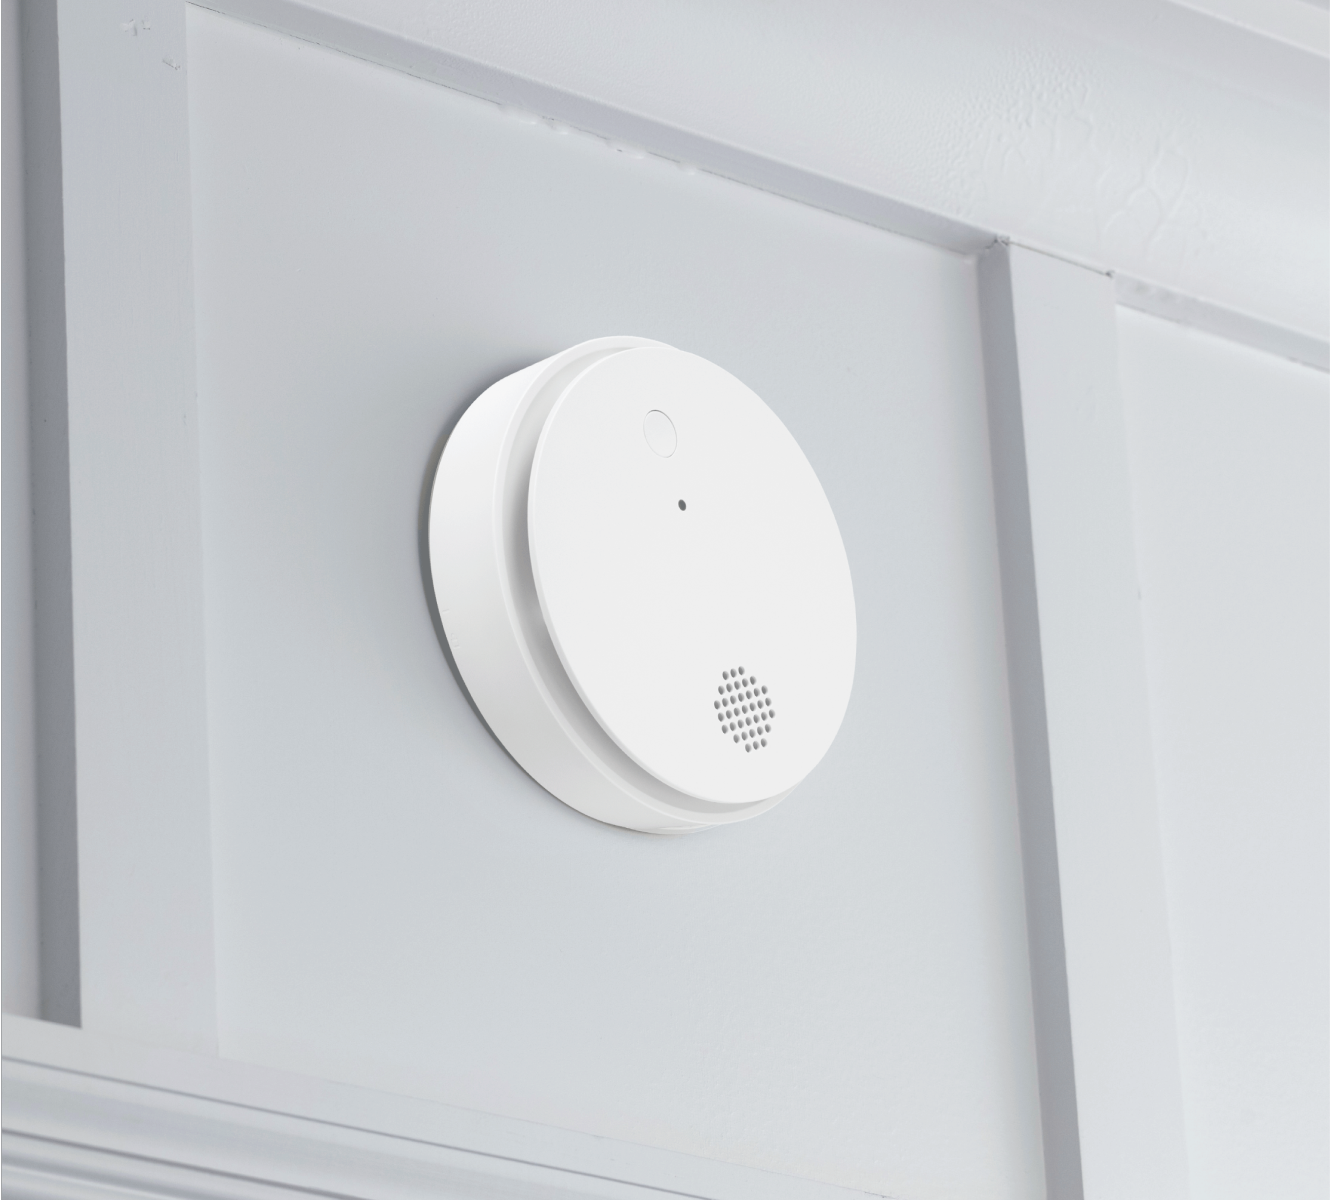 Smoke Detector installed on a wall in a home